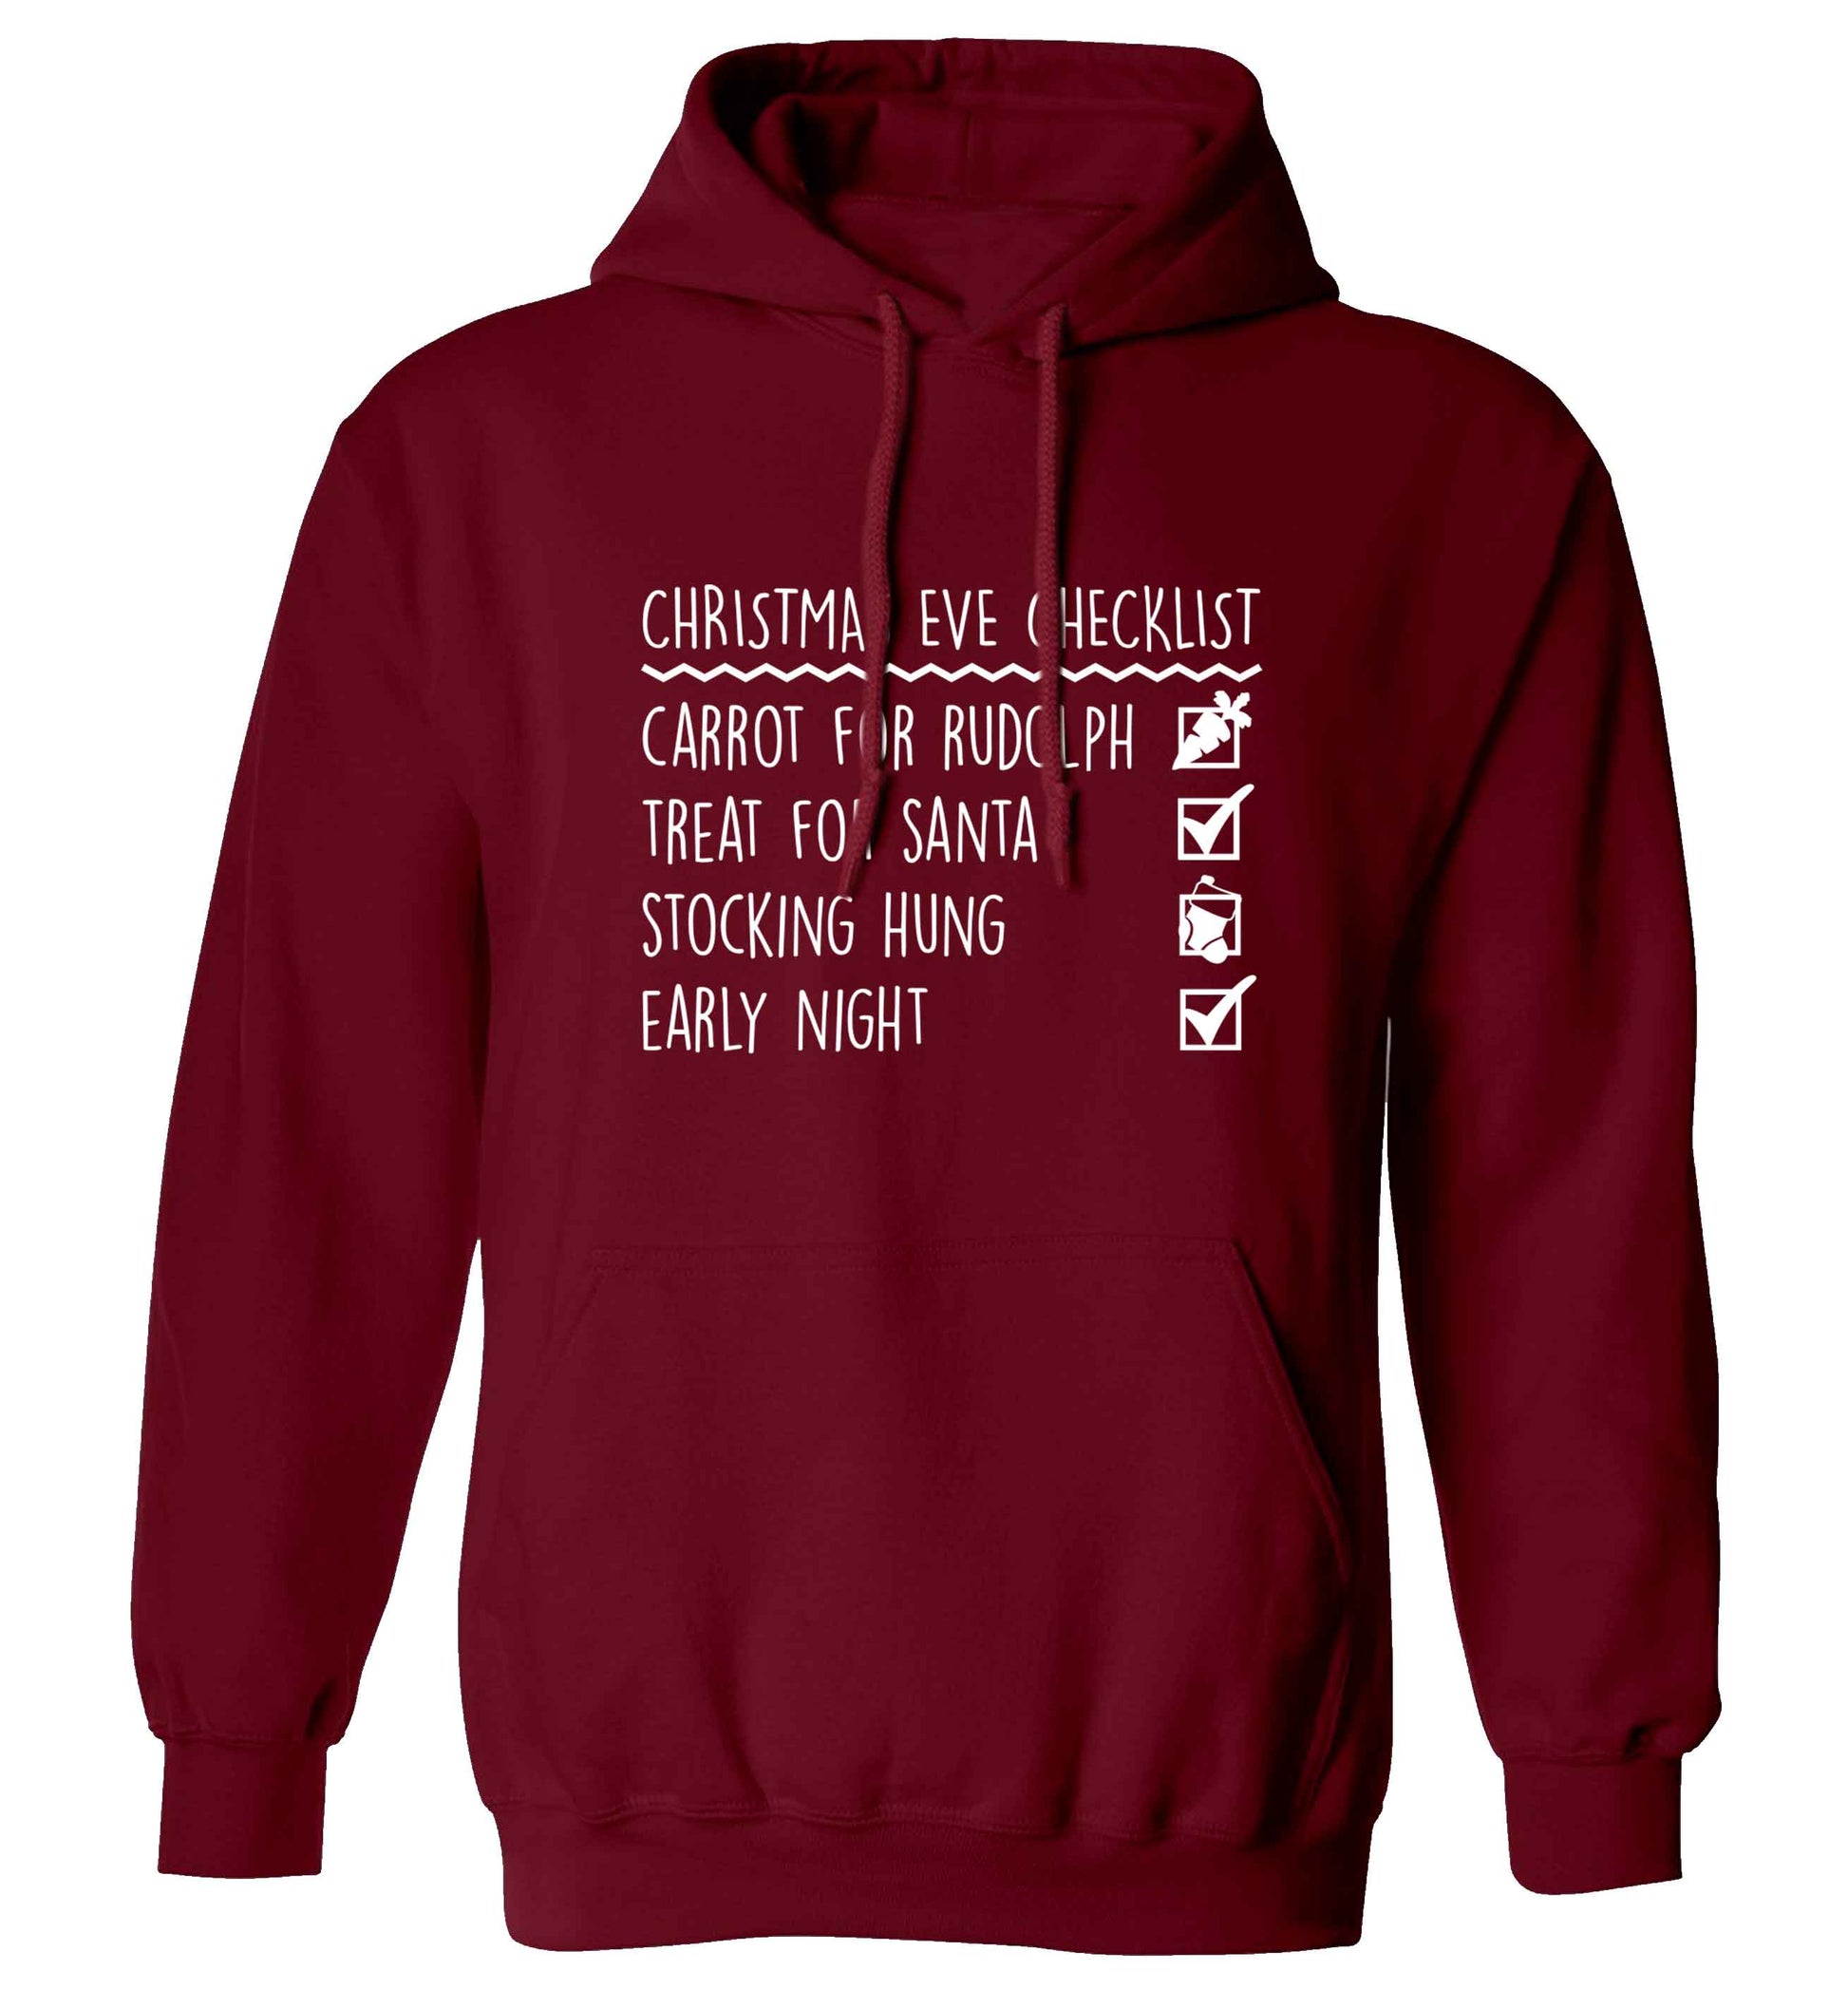 Candy Canes Candy Corns adults unisex maroon hoodie 2XL